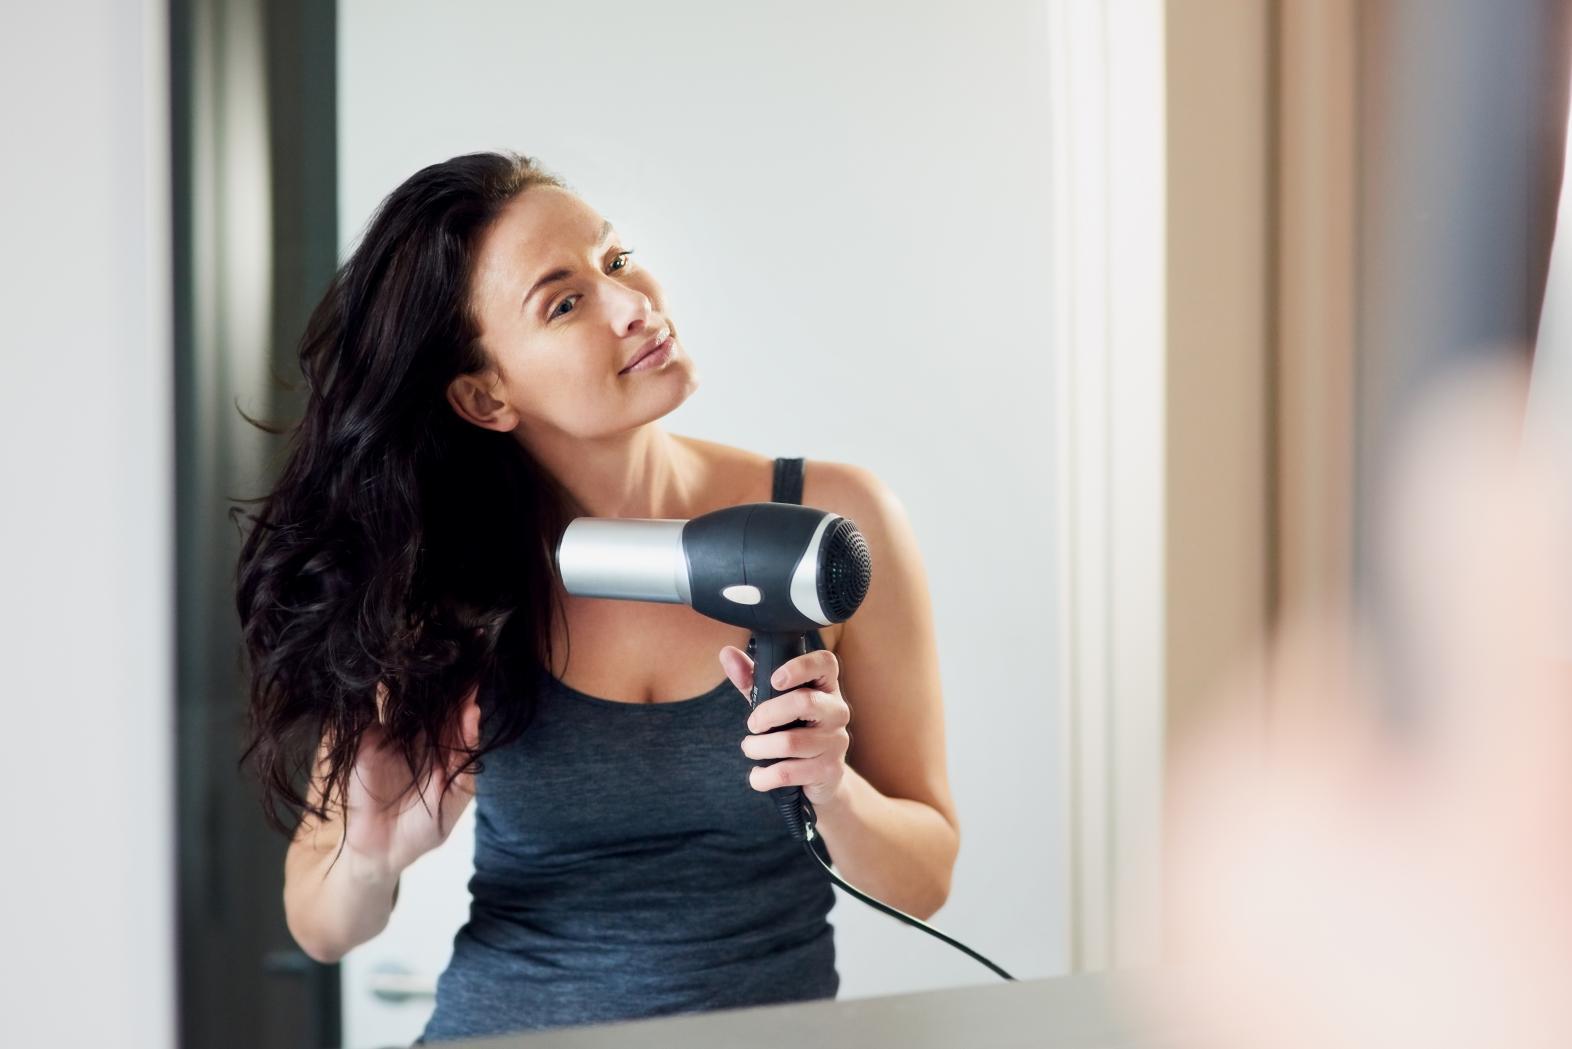 Woman using an electric hair dryer to blow dry her hair in the bathroom mirror